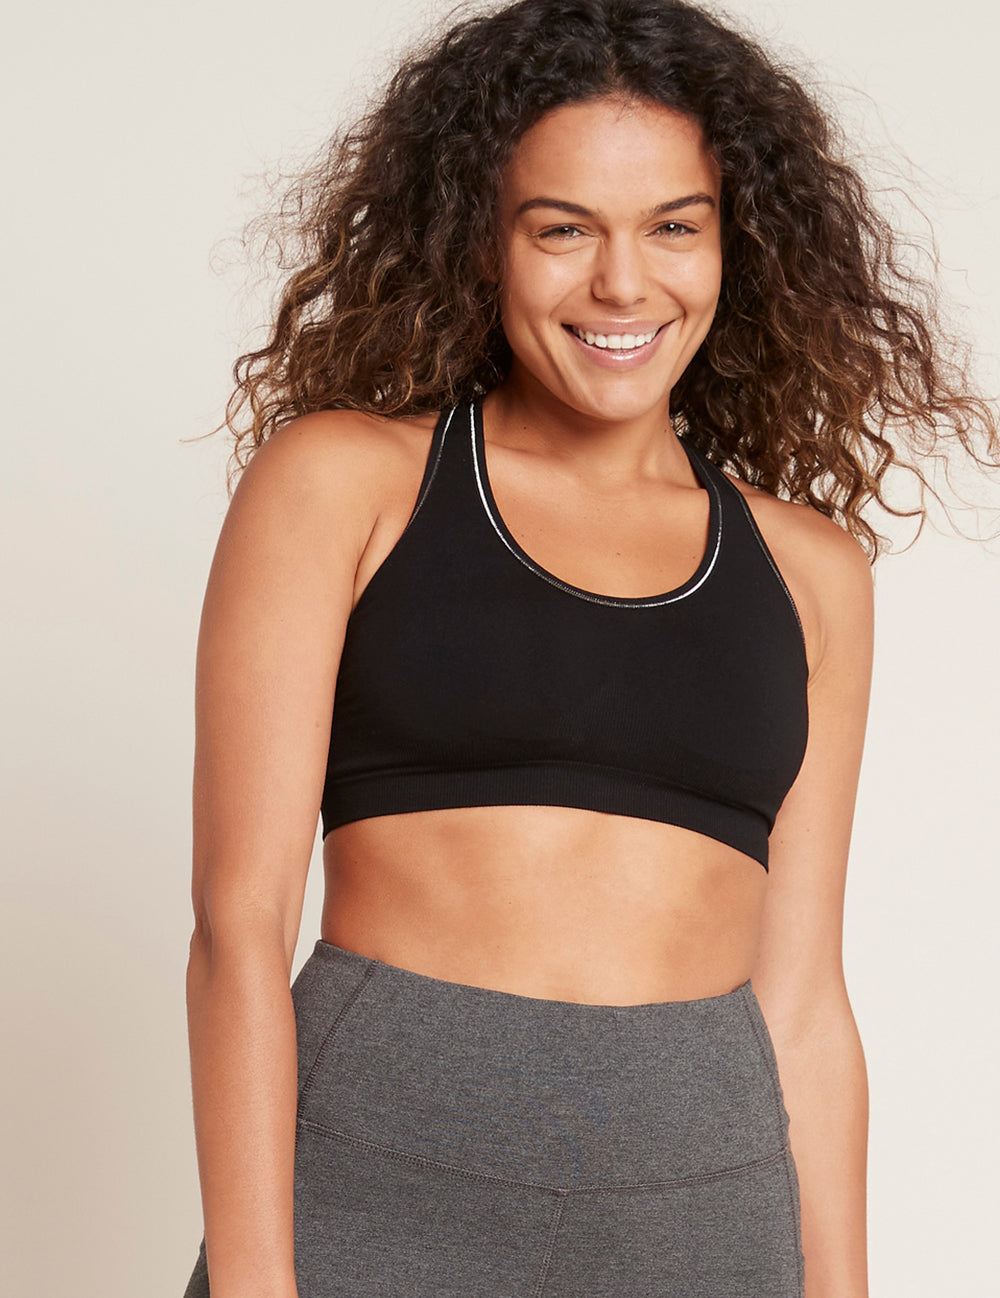 Nursing sports bra, yes please! Shop MOMents Clothing active wear